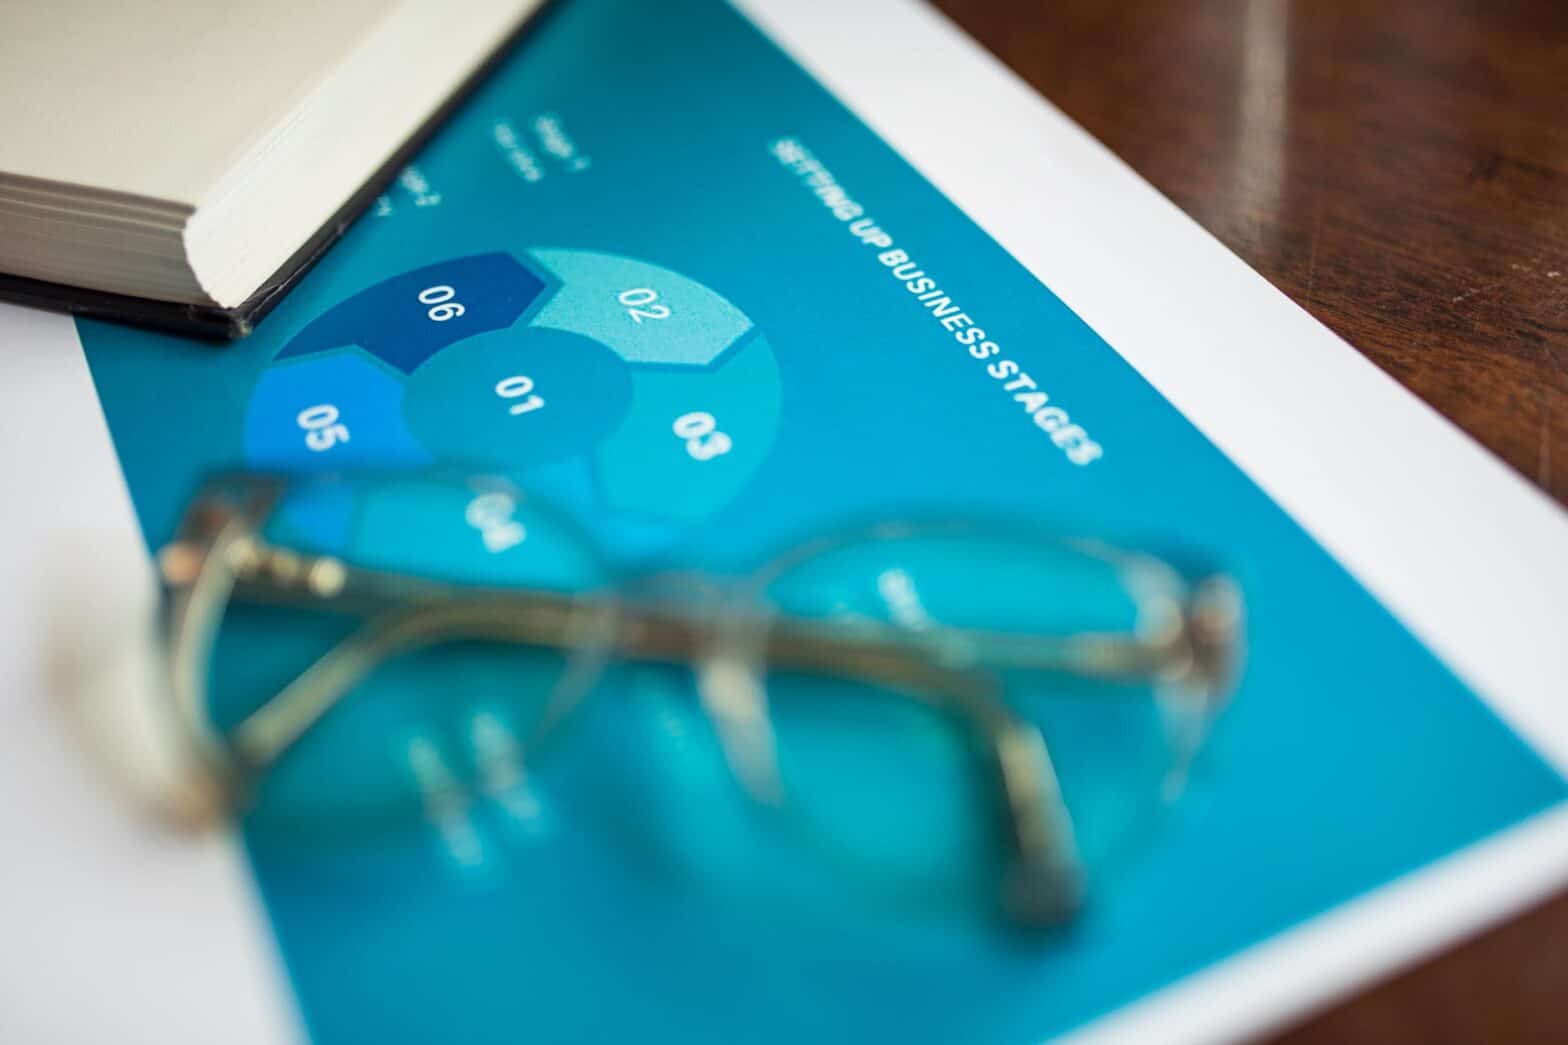 eyeglasses and book on business paper